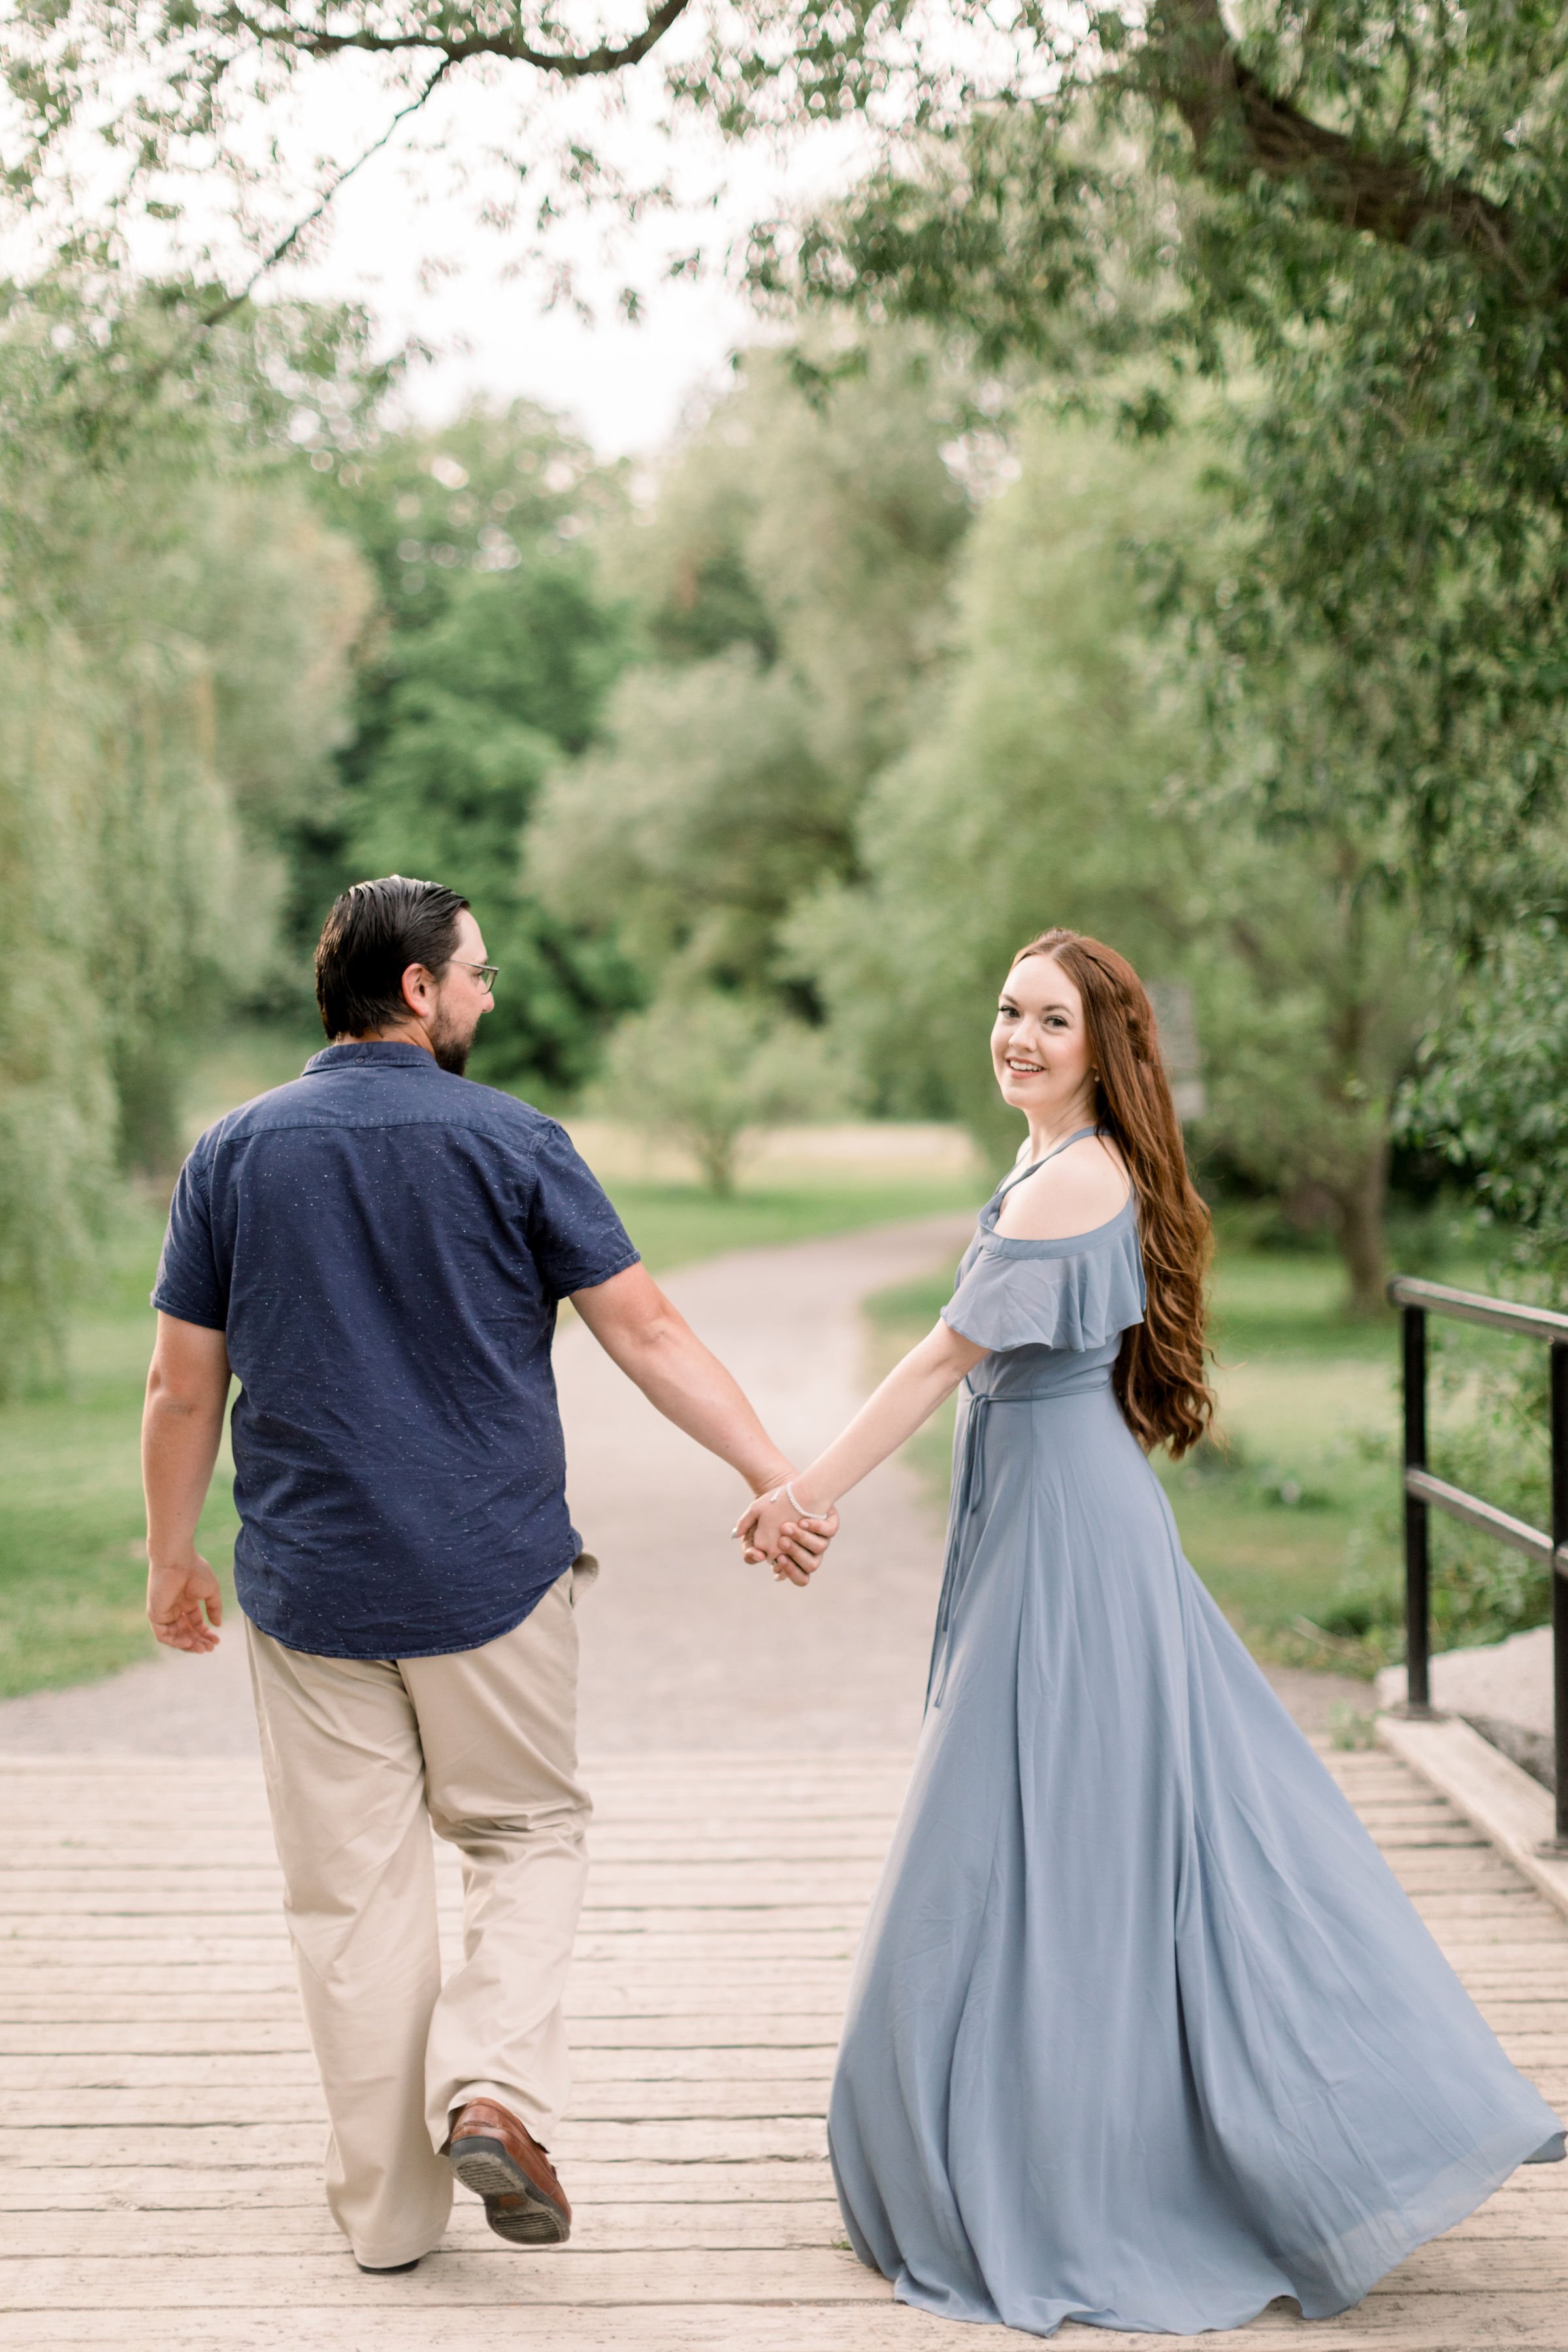  The engaged couple holds hands while walking on a paved path in Ottawa as the woman looks back by Chelsea Mason Photography. paved path #chelseamasonphotography #chelseamasonengagements #Ottawaengagements #DominonArboretum #Ottawaphotographers&nbsp;